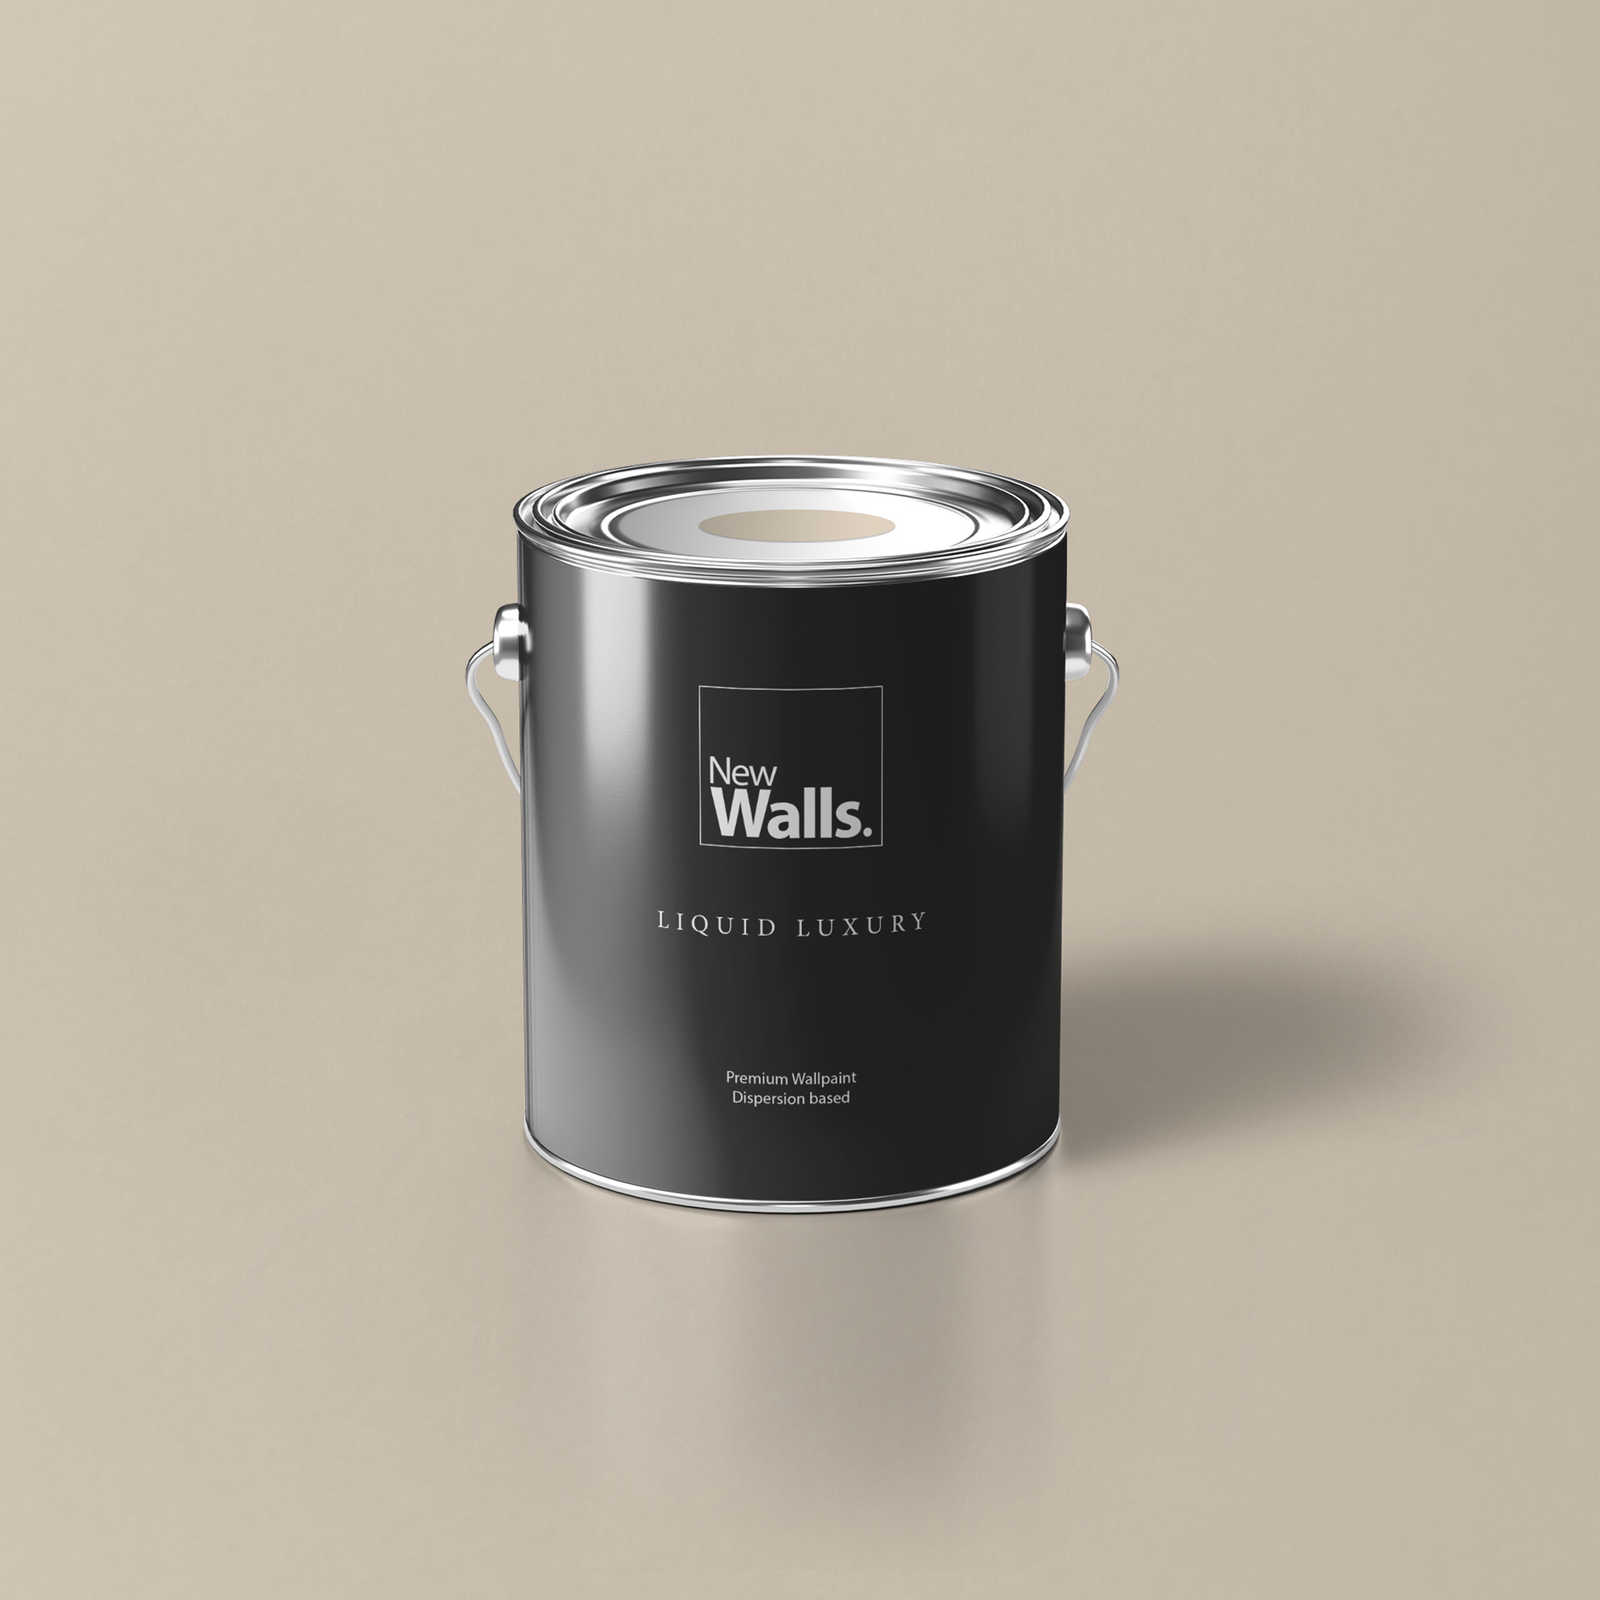 Premium Wall Paint Warm Sand »Essential Earth« NW708 – 2.5 litre
